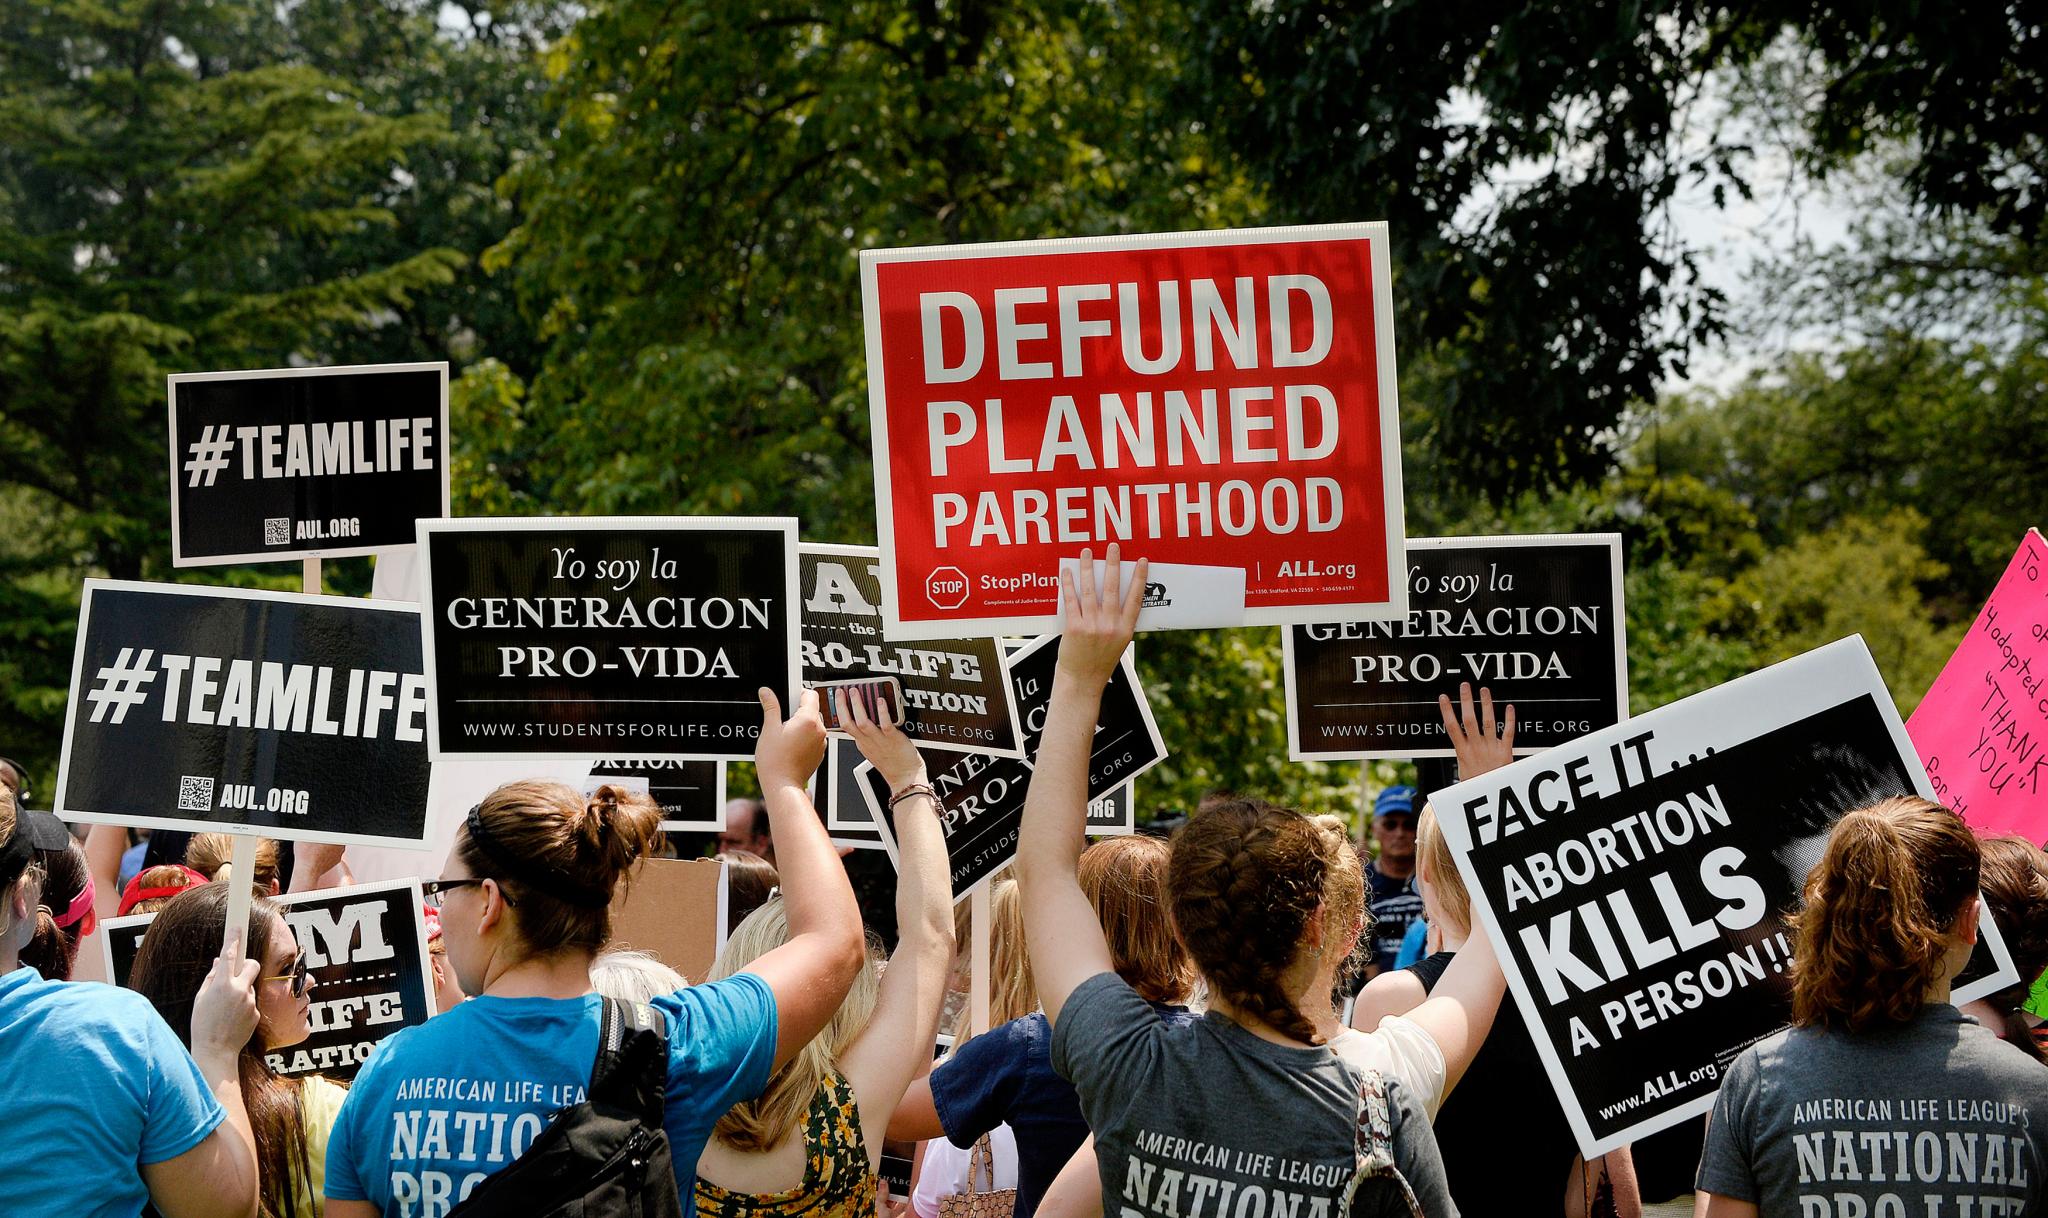 Do You Support or Reject the Senate's Decision to Stop Funding Planned Parenthood?